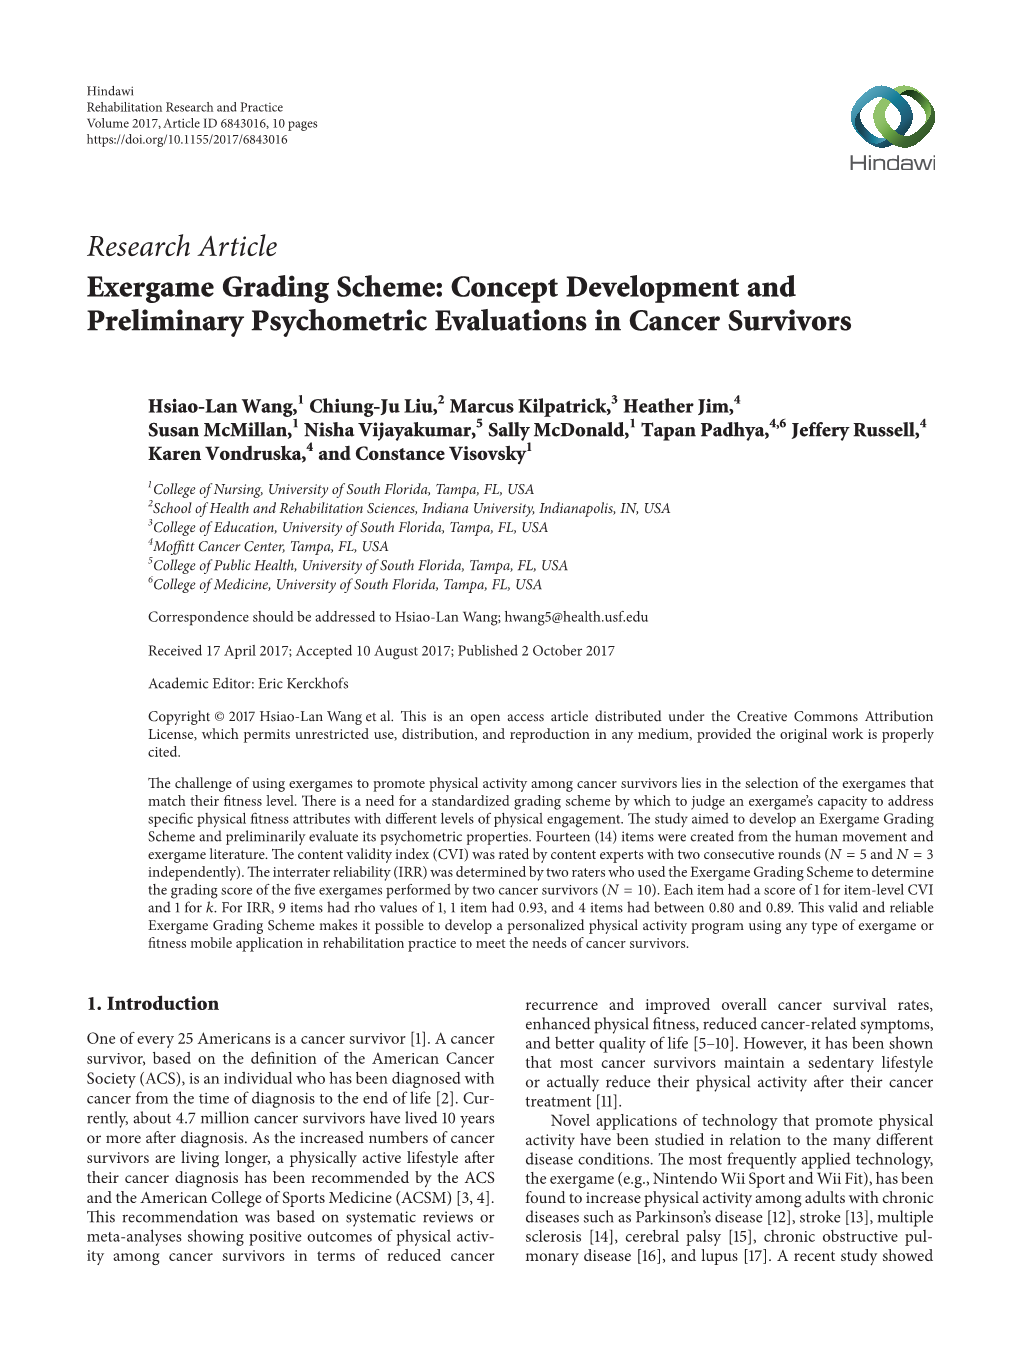 Research Article Exergame Grading Scheme: Concept Development and Preliminary Psychometric Evaluations in Cancer Survivors